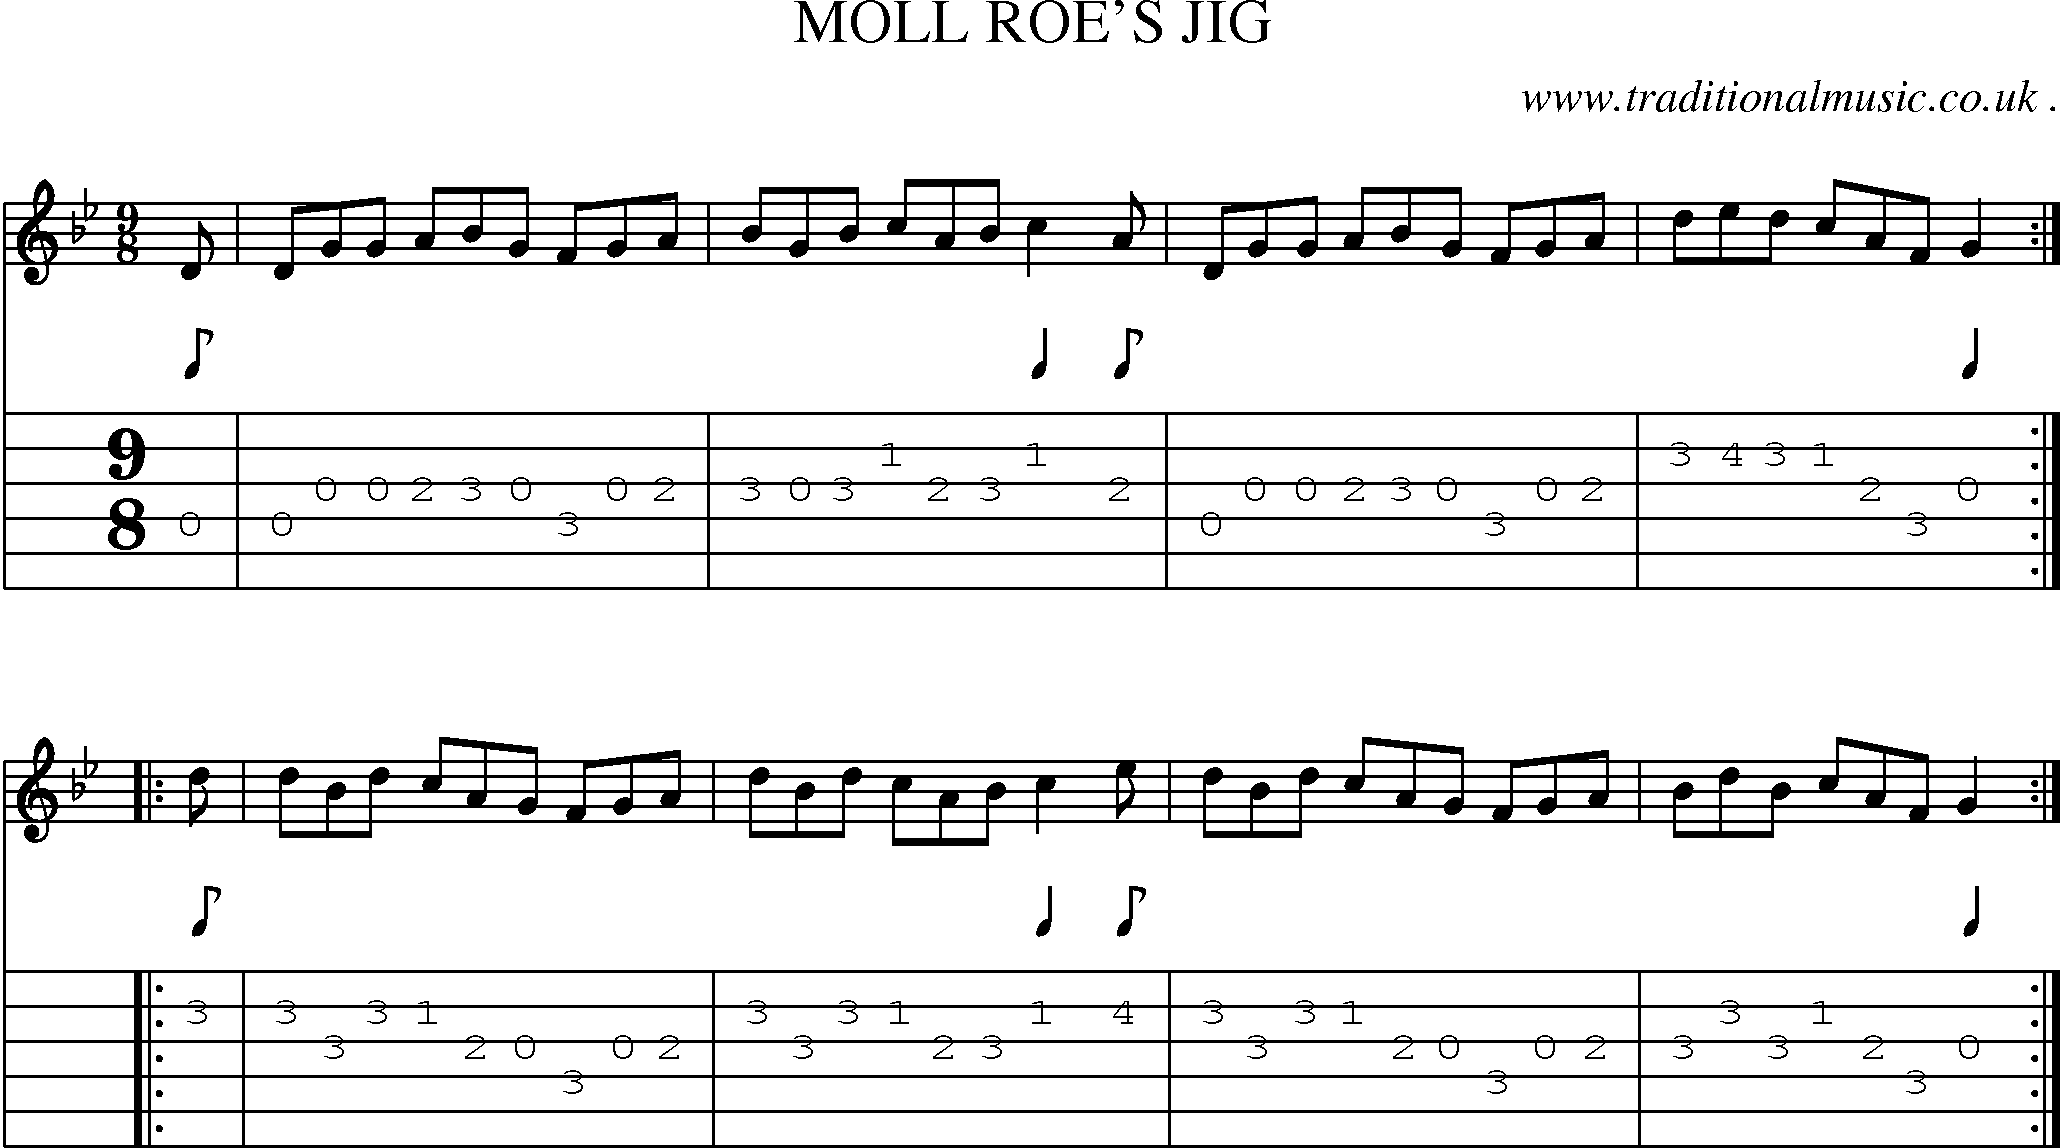 Sheet-Music and Guitar Tabs for Moll Roes Jig